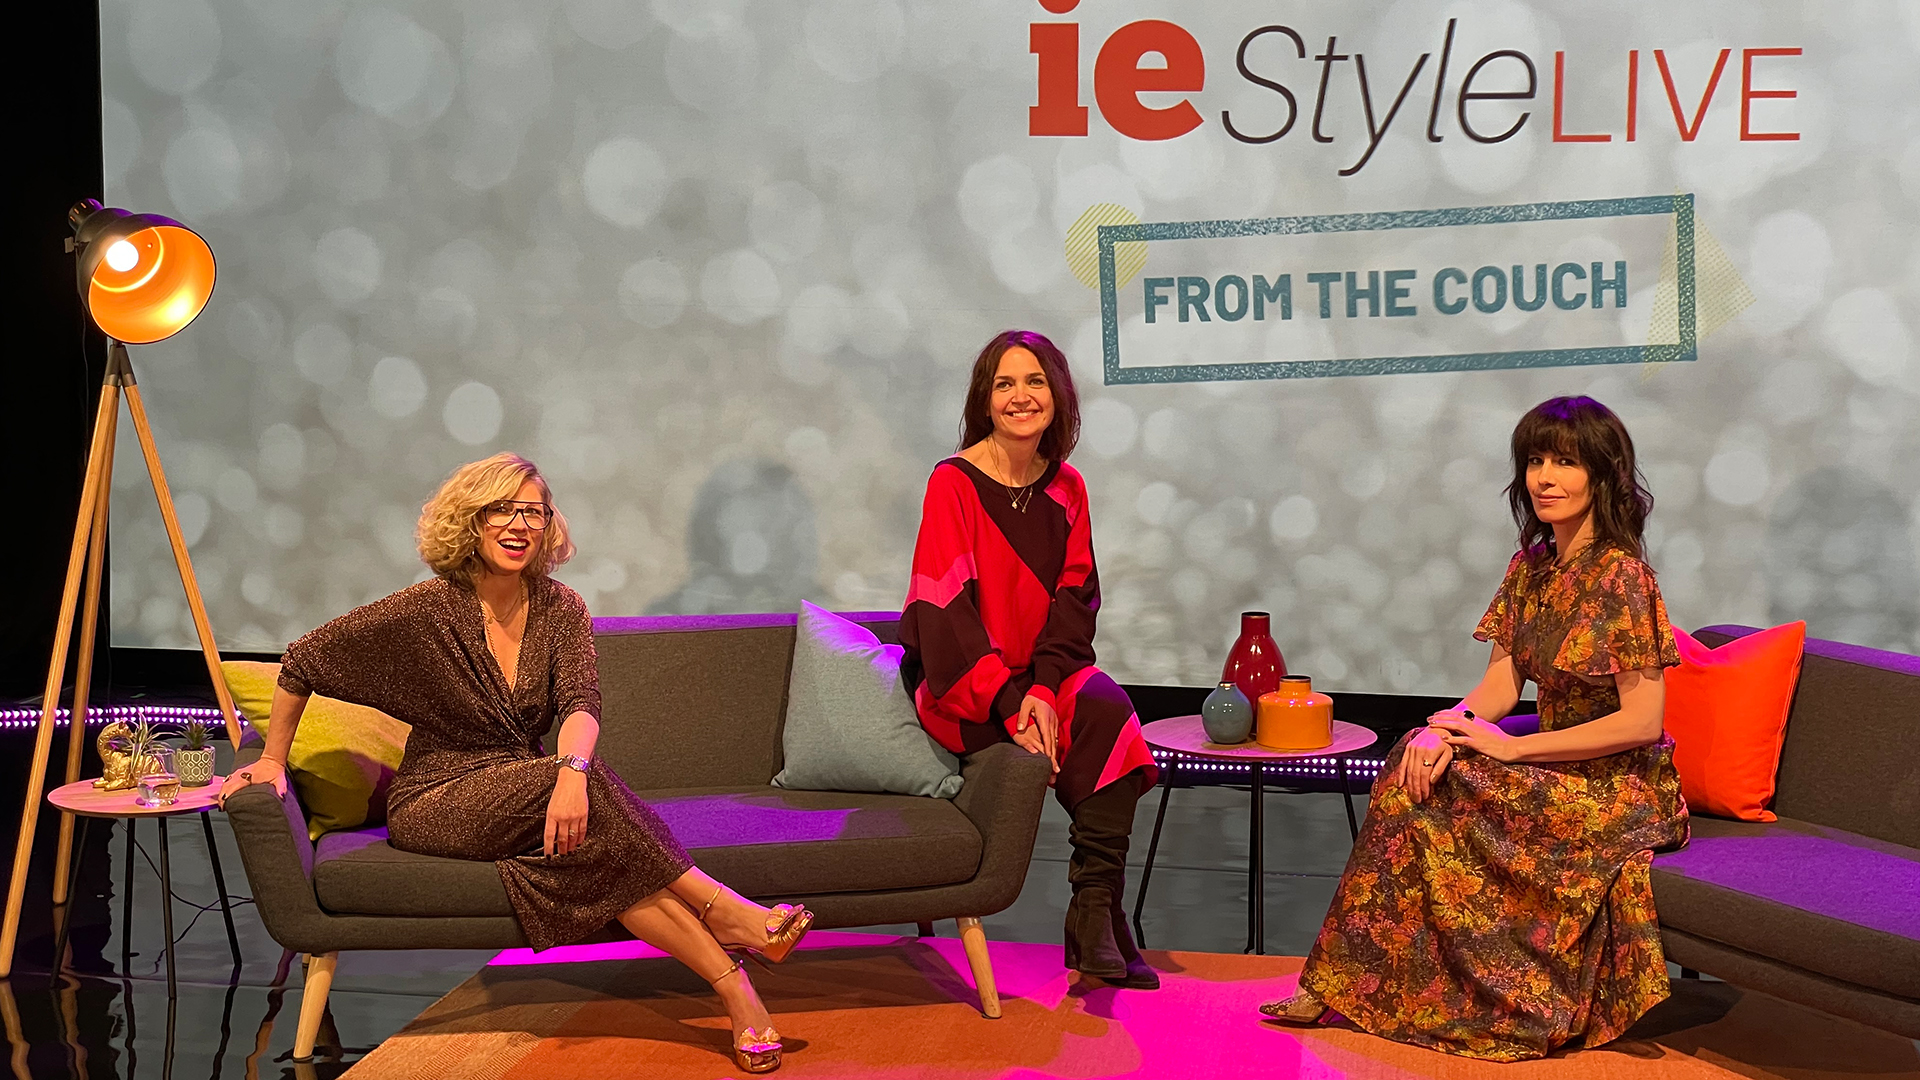 Irish Examiner ieStyle Live from VE Main studio with special guest Cecelia Ahern, joined by Sonya Lennon, Annmarie O’Connor and Dr Clodagh O'Shea was streamed live.